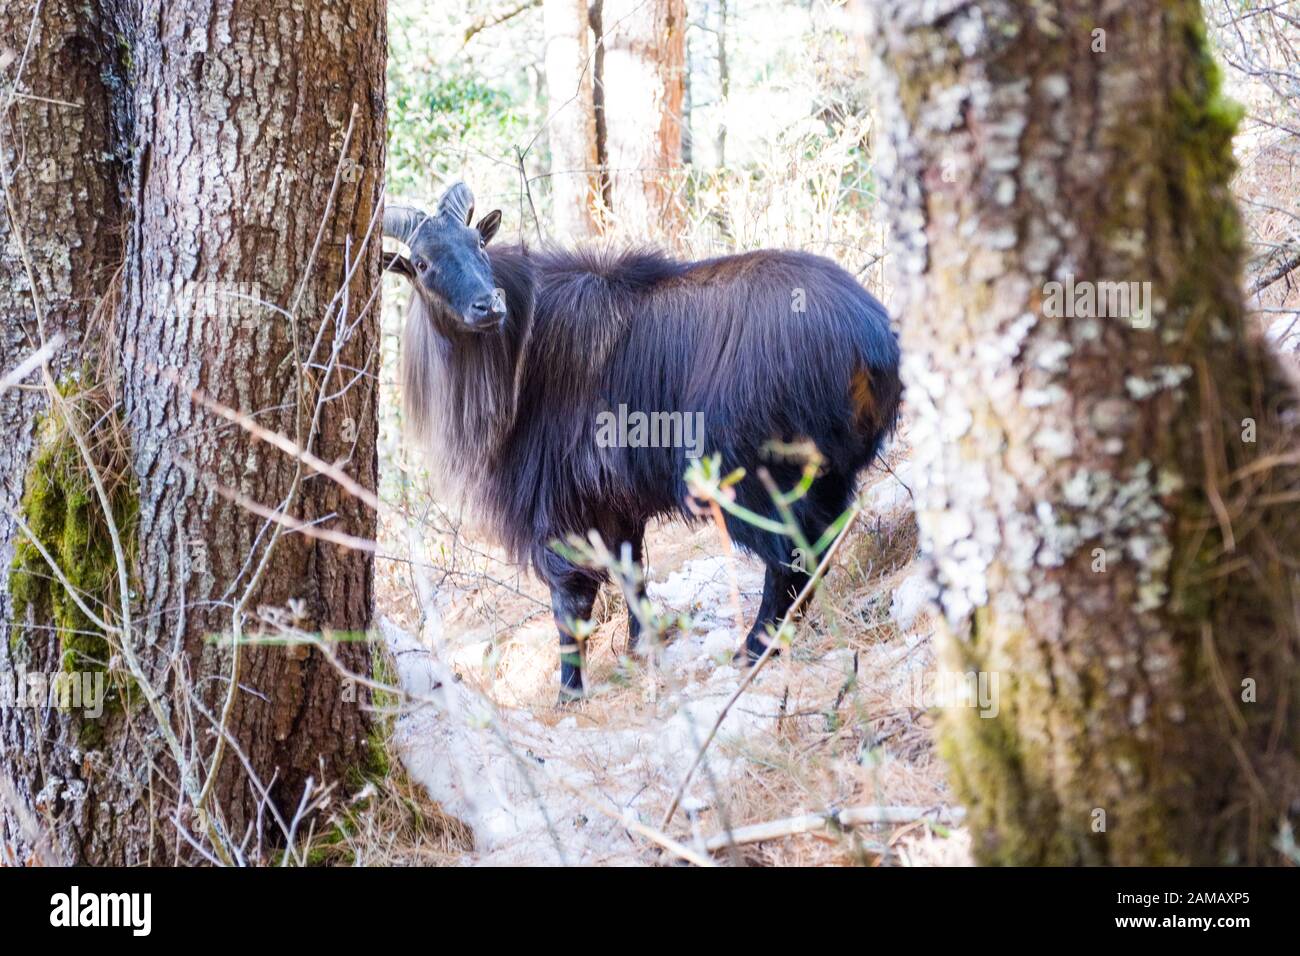 Himalayan Thar / Tahr, a large wild goat, in the Khumbu region of the Nepal Himalayas Stock Photo